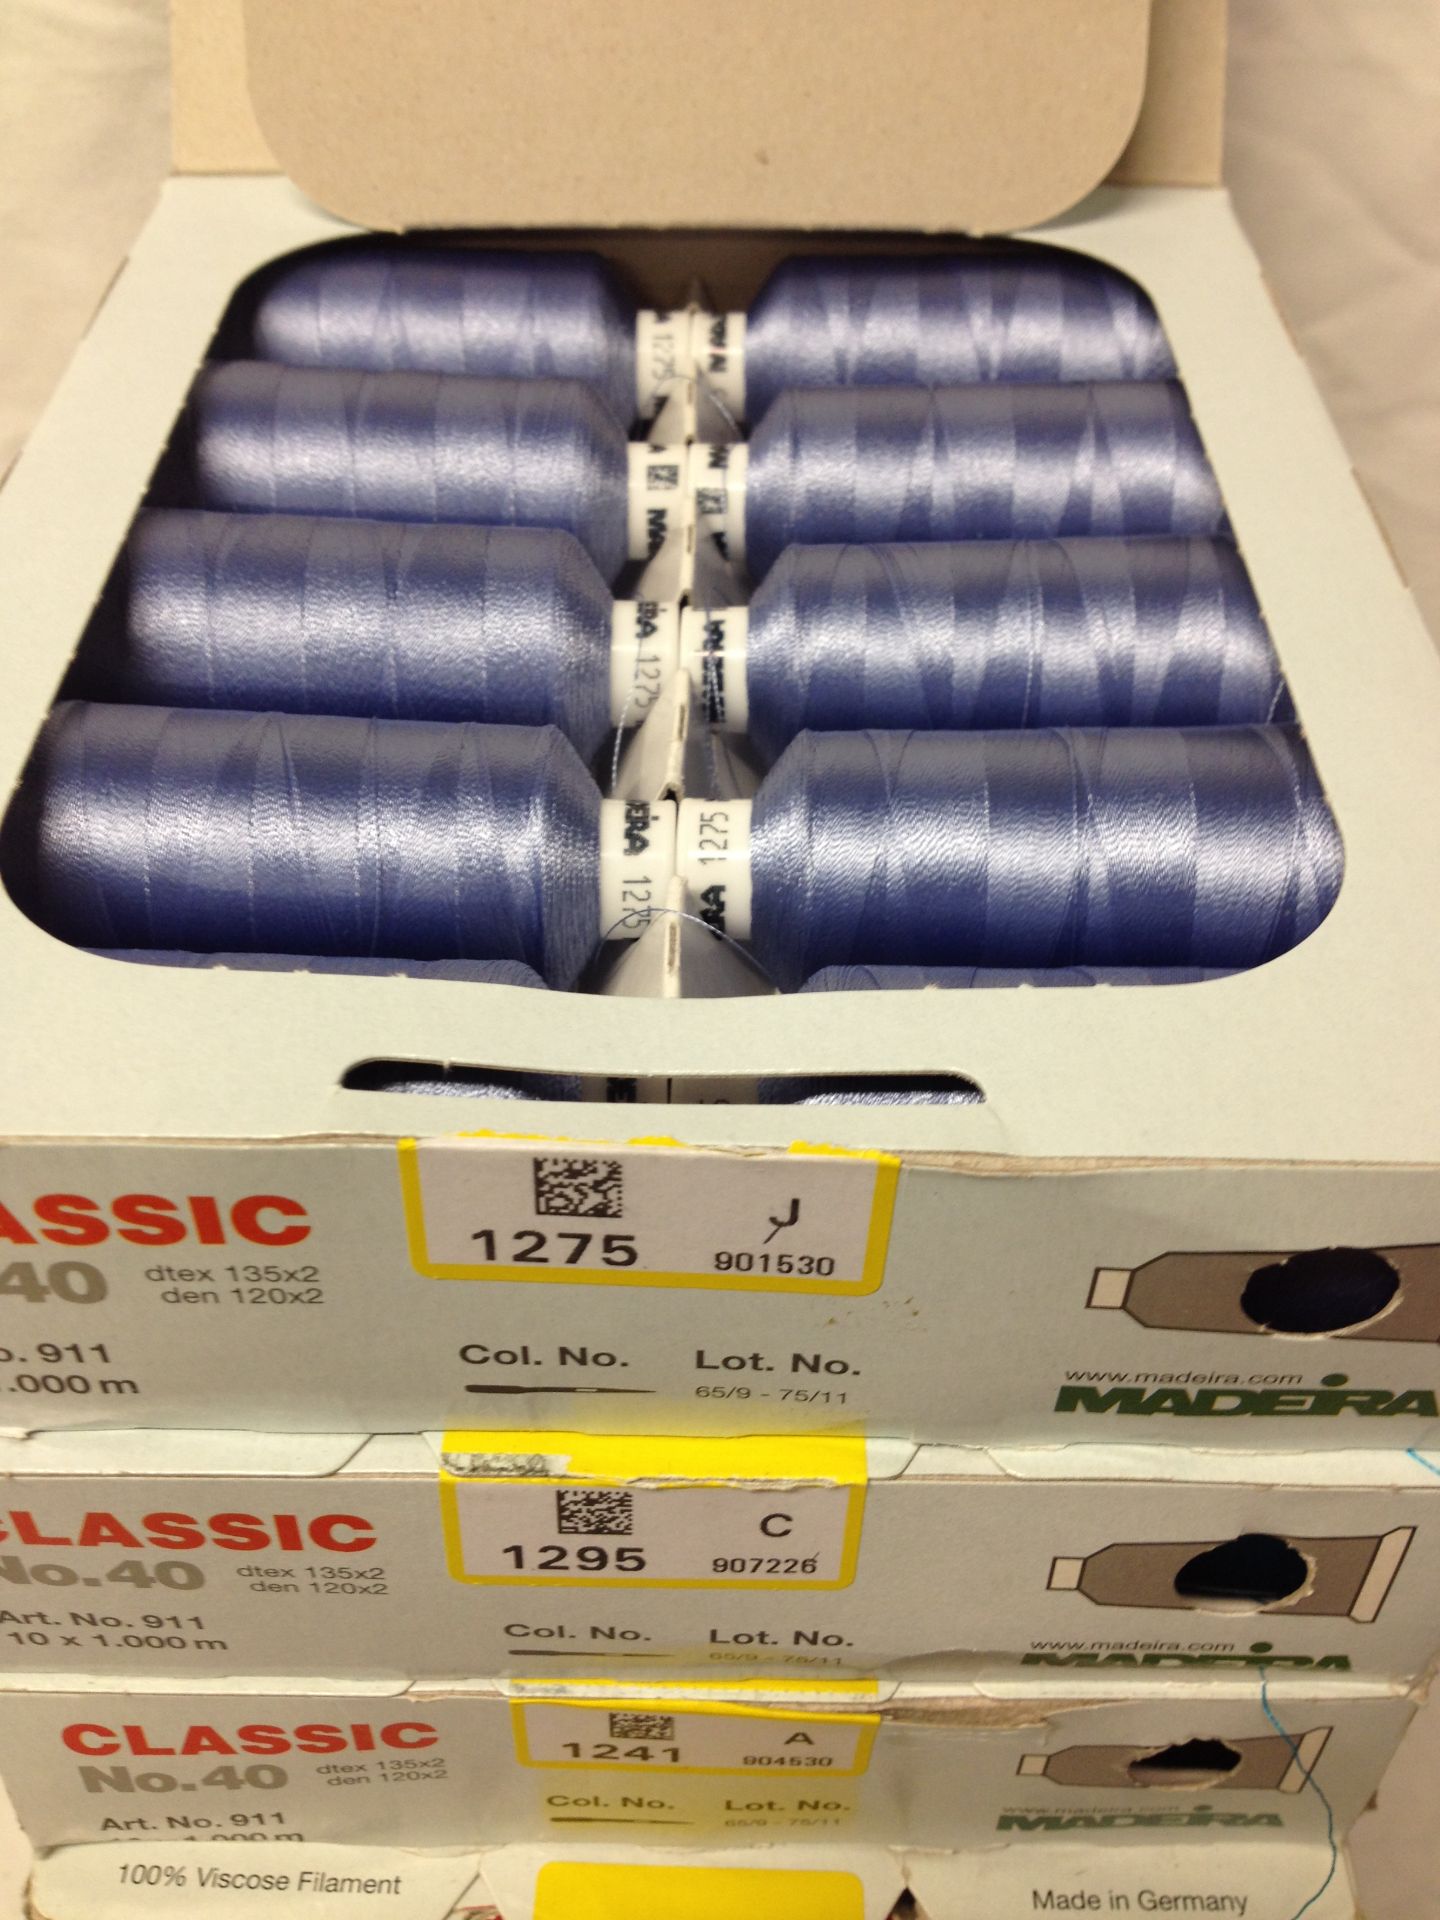 Madeira Classic 40 Viscose Embroidery Rayon x50 Boxes - Image 4 of 8